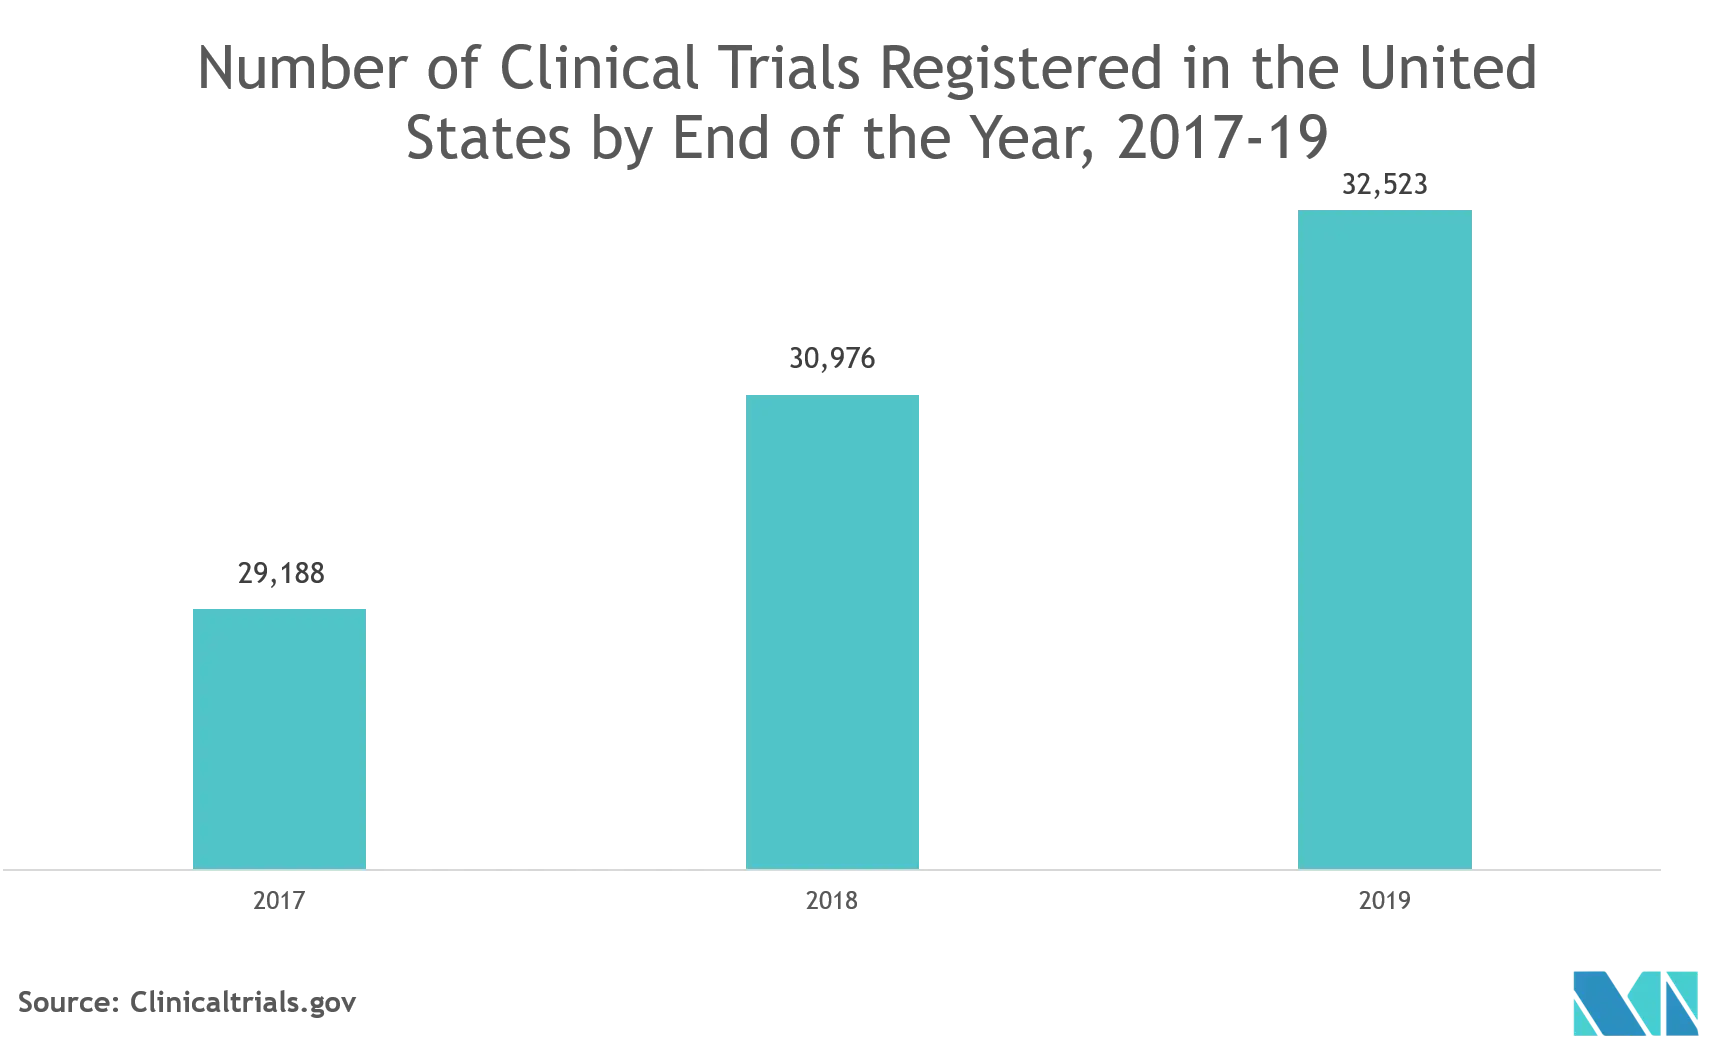 Electronic Trial Master File Market Key Trends